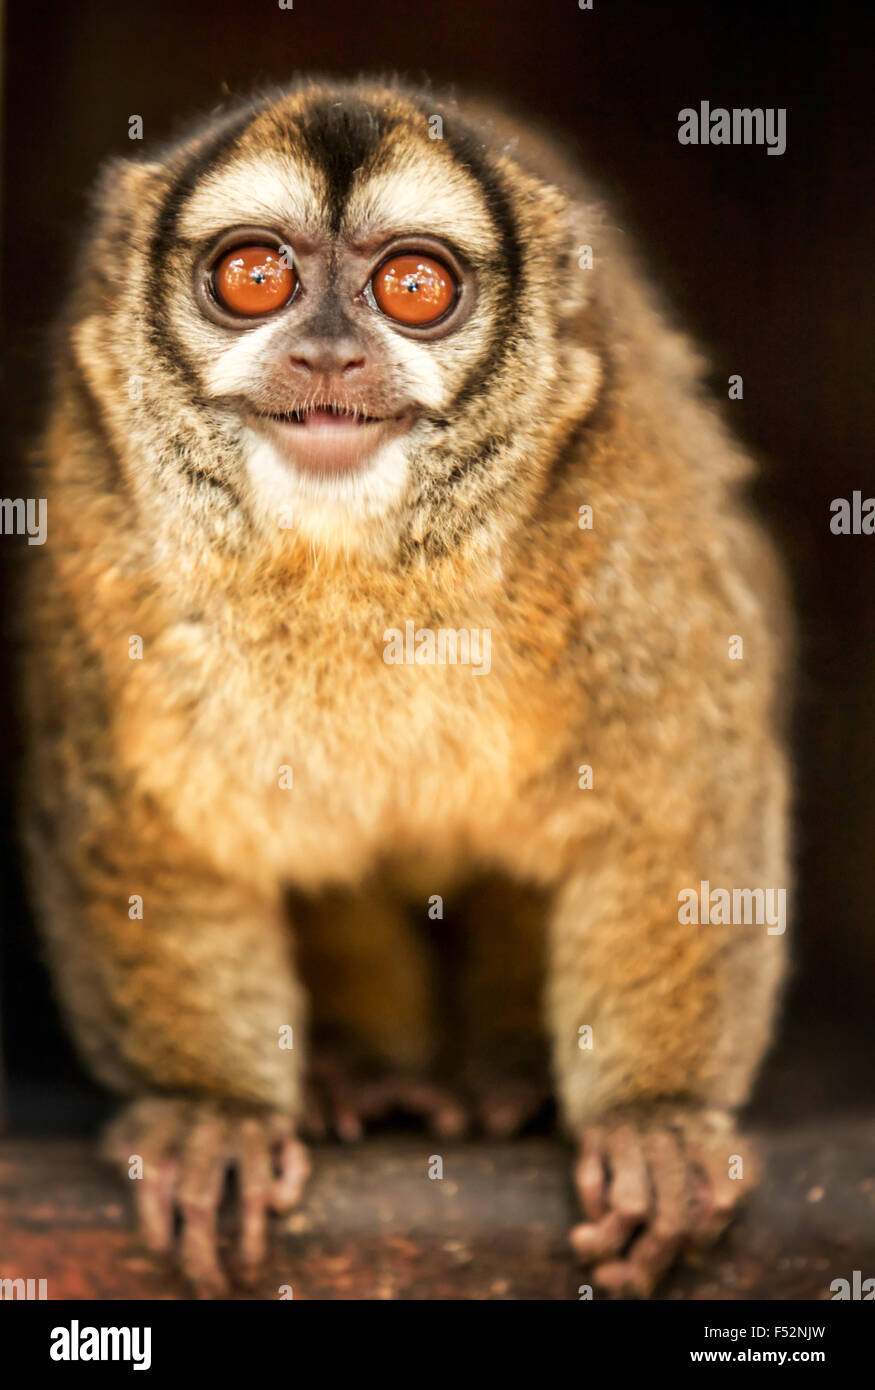 Owl Monkey Laughing At Spectators Shoot In A Animal Refuge In Brasil Stock Photo